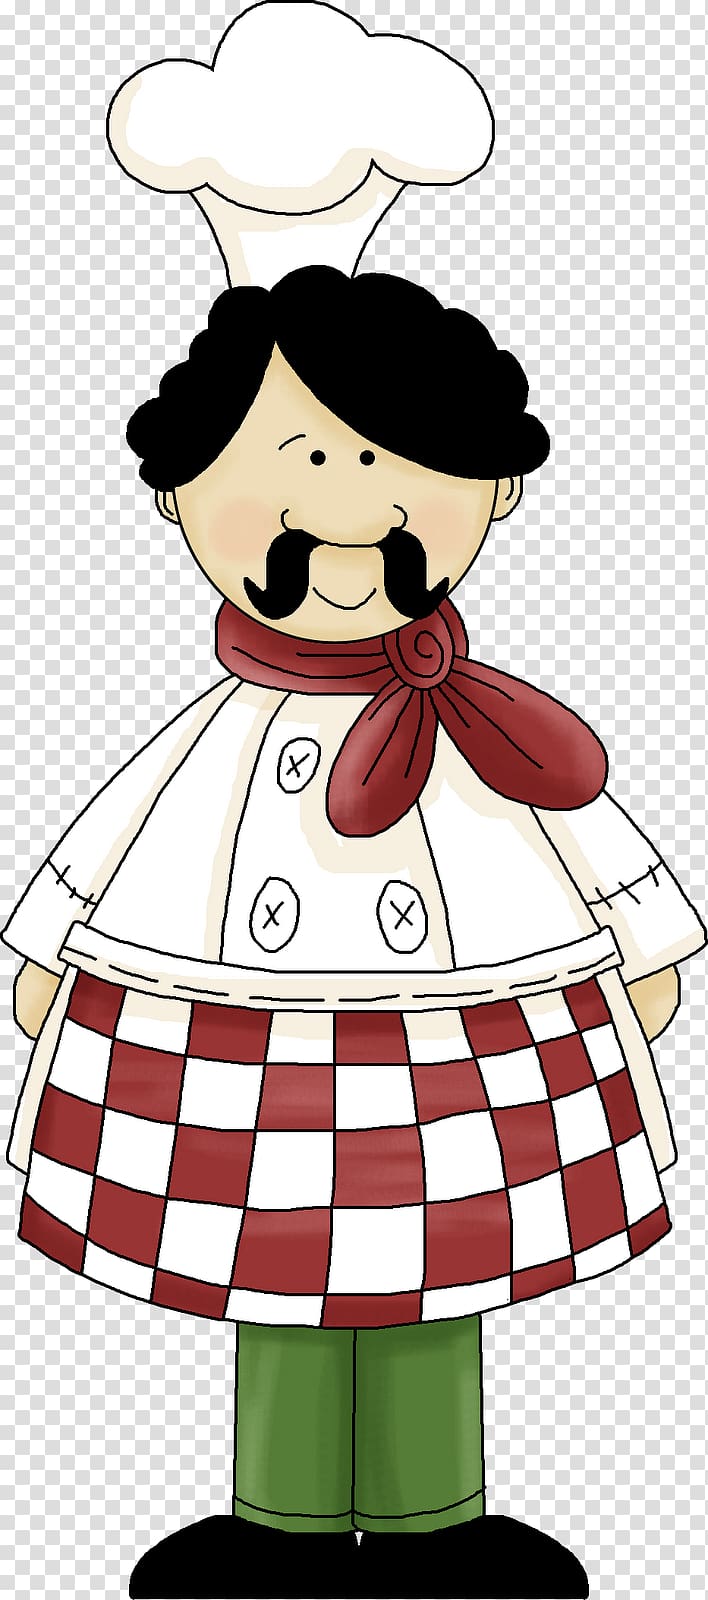 cooking clipart guy italian